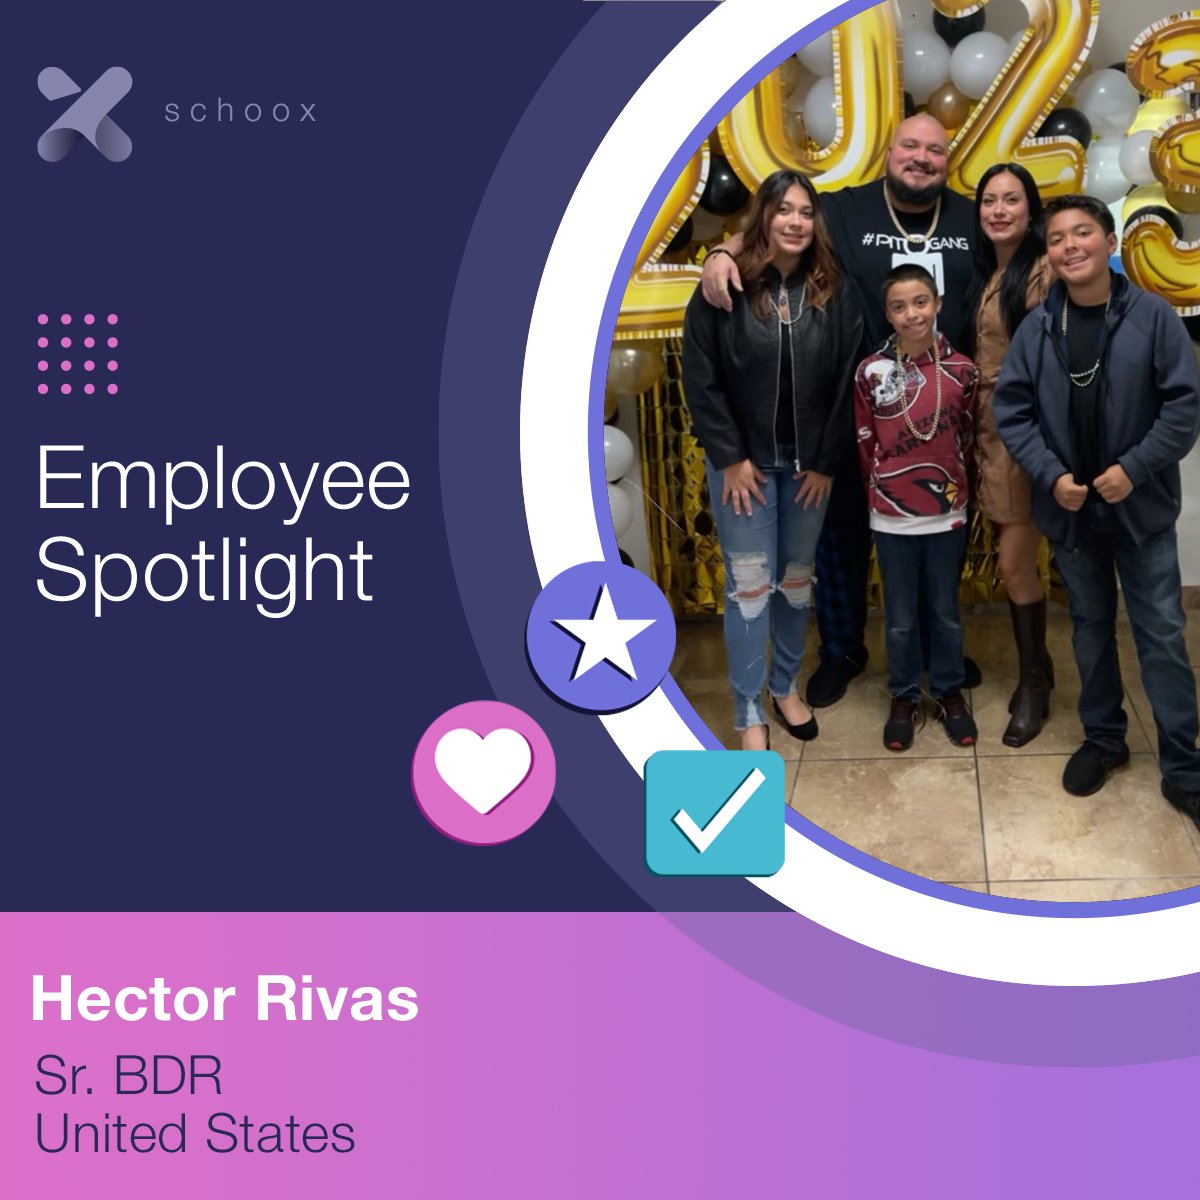 This month's Employee Spotlight is on Hector Rivas! Hector considers integrity to be the most important quality in a colleague. We are delighted to have you here at Schoox. Keep up the fantastic work!